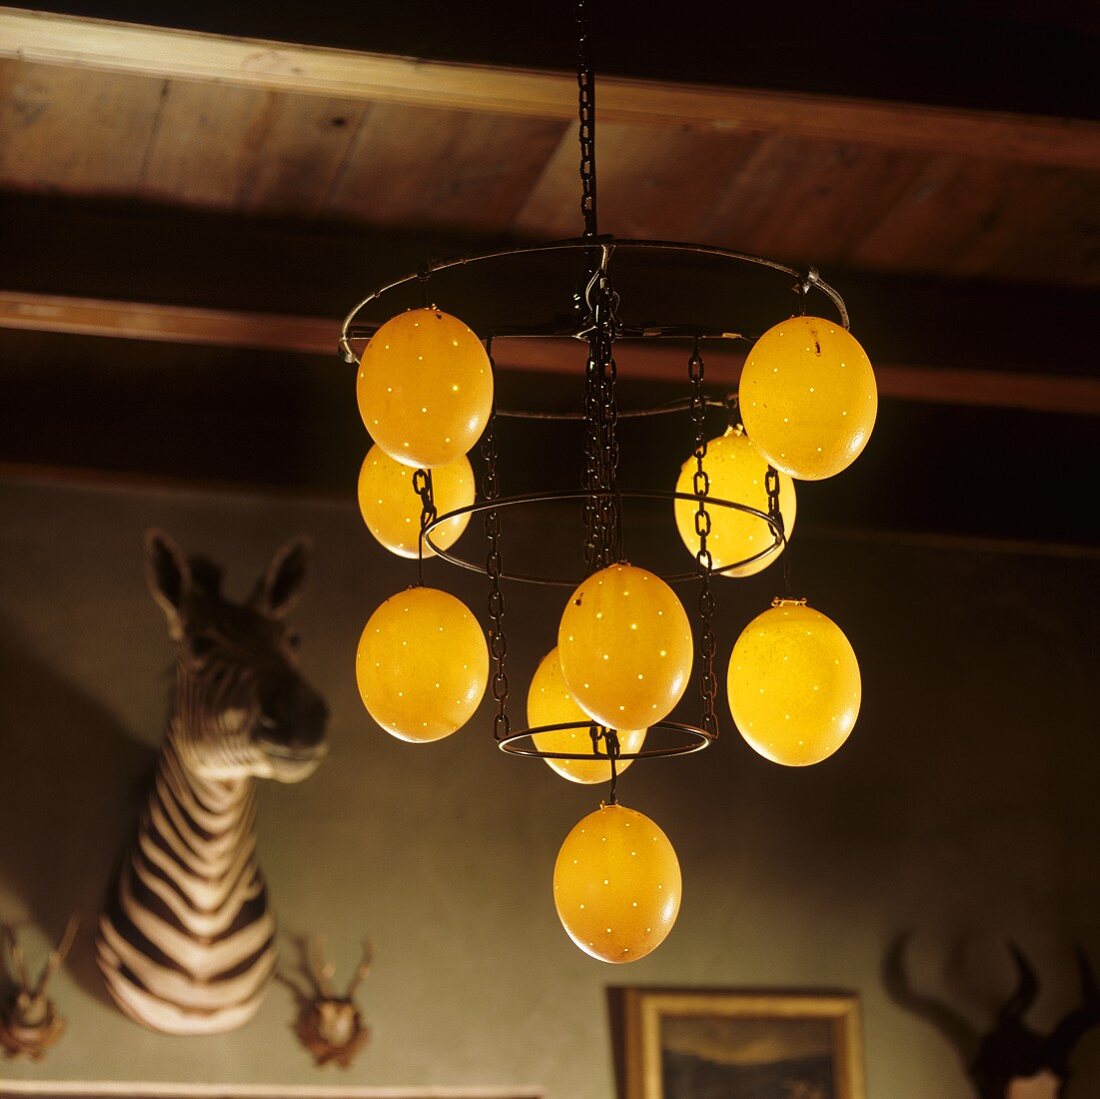 Pendent lamps with illuminated, round glass shades hanging from a wooden ceiling and a stuffed zebra head hanging on the wall